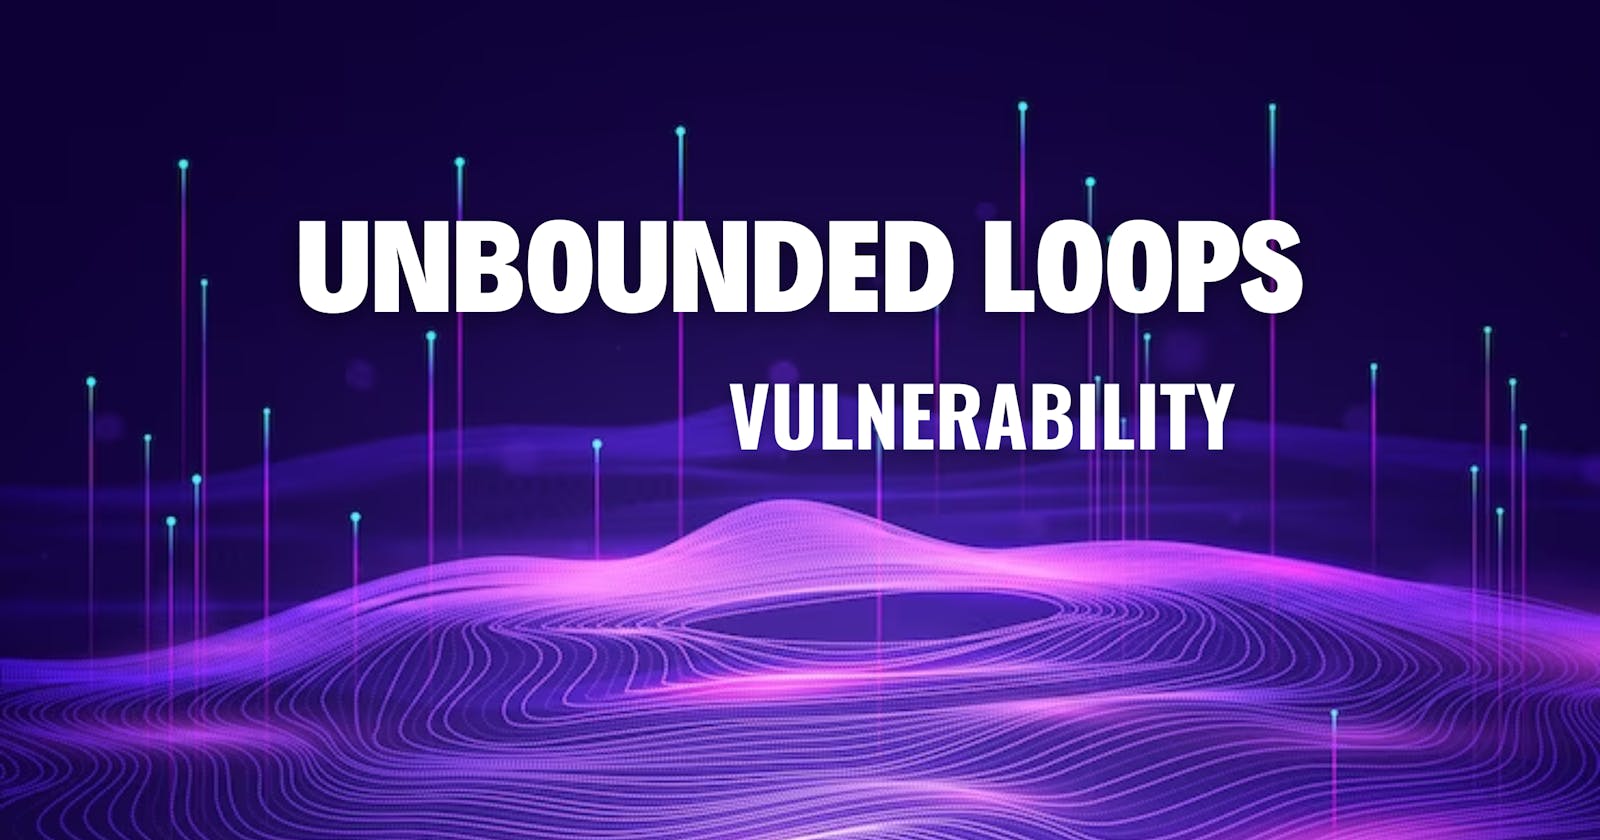 The Unbounded Loops Vulnerability: Denial of Service